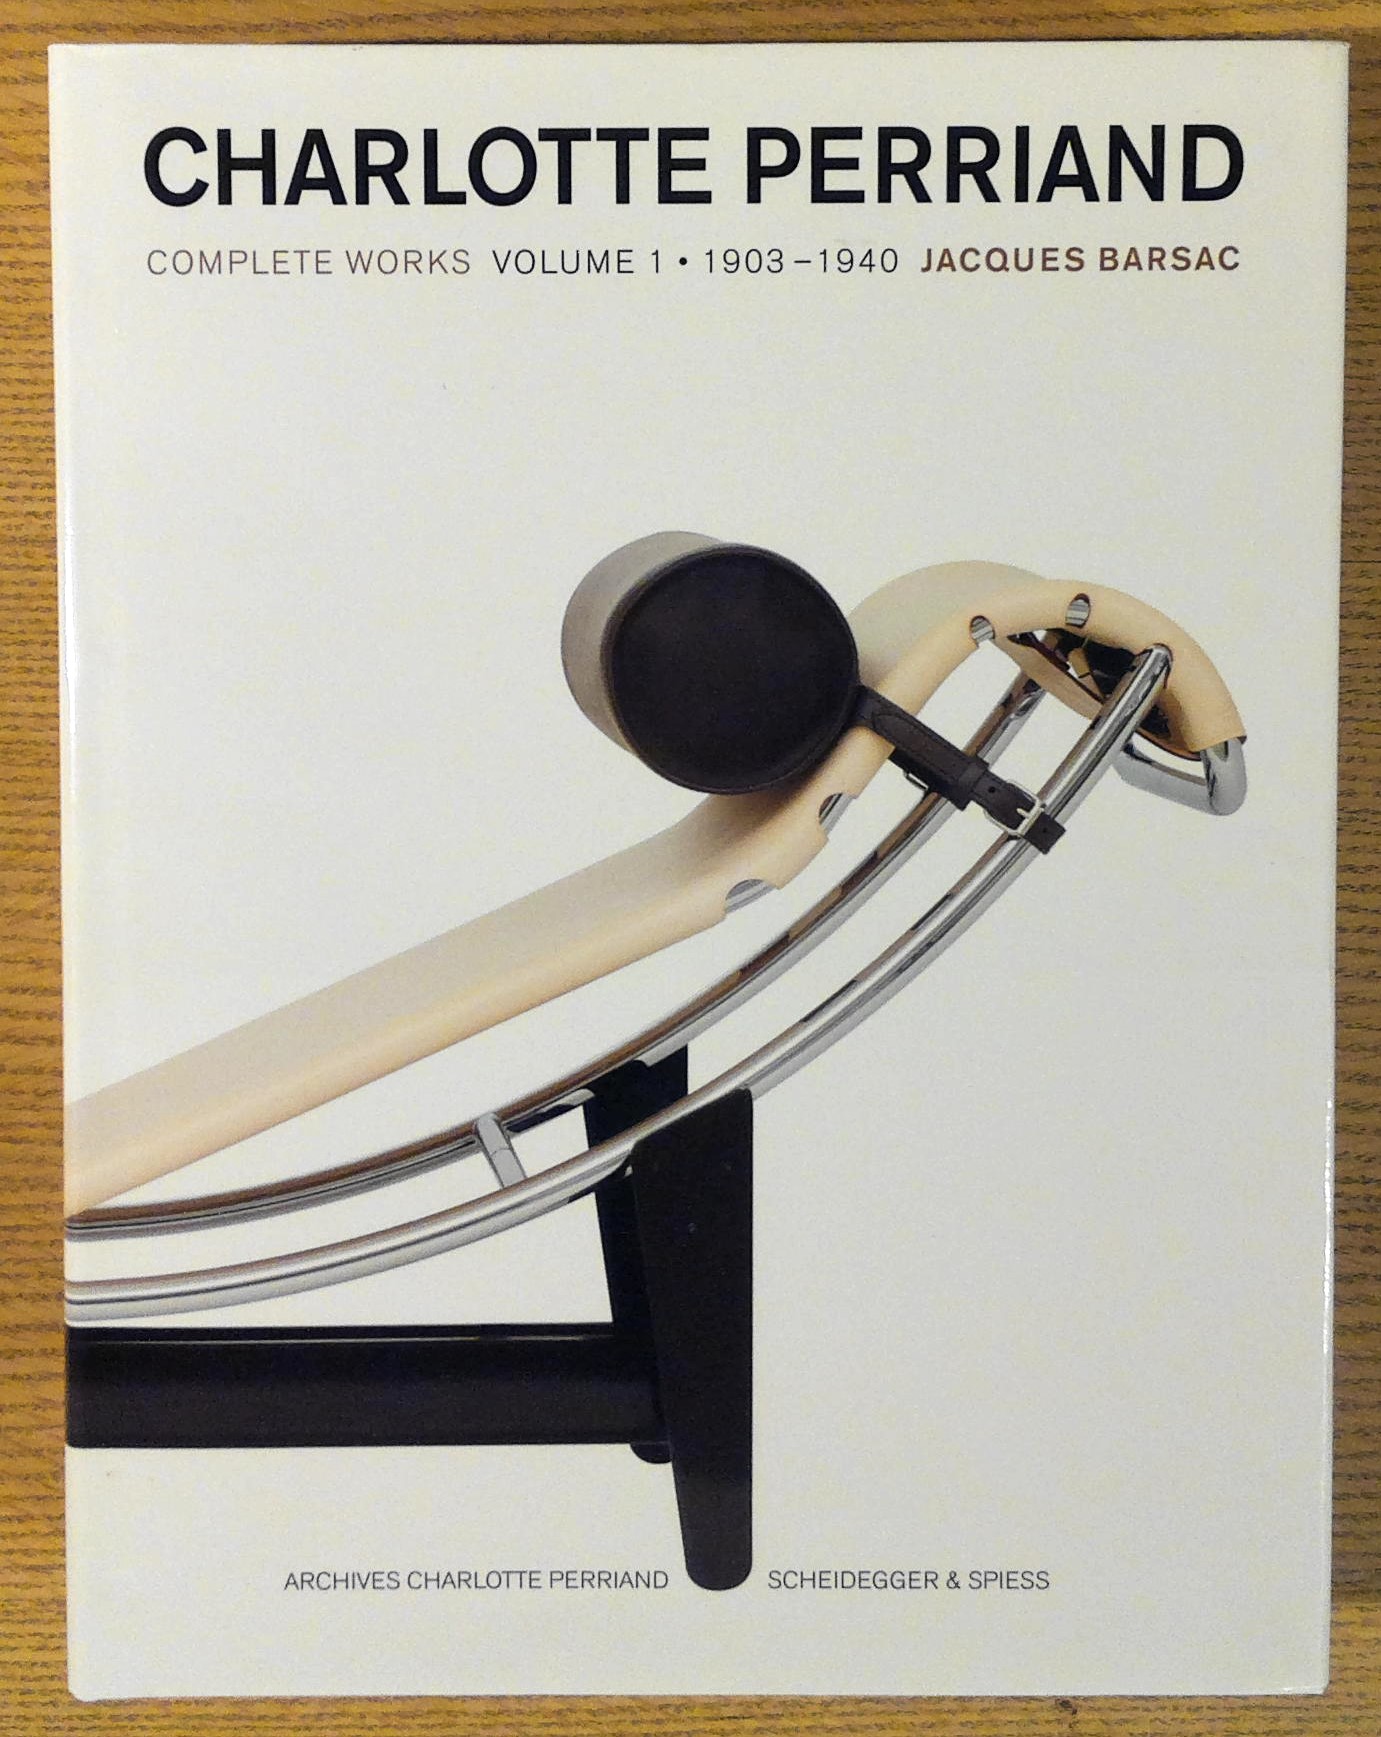 Charlotte Perriand Online Shop